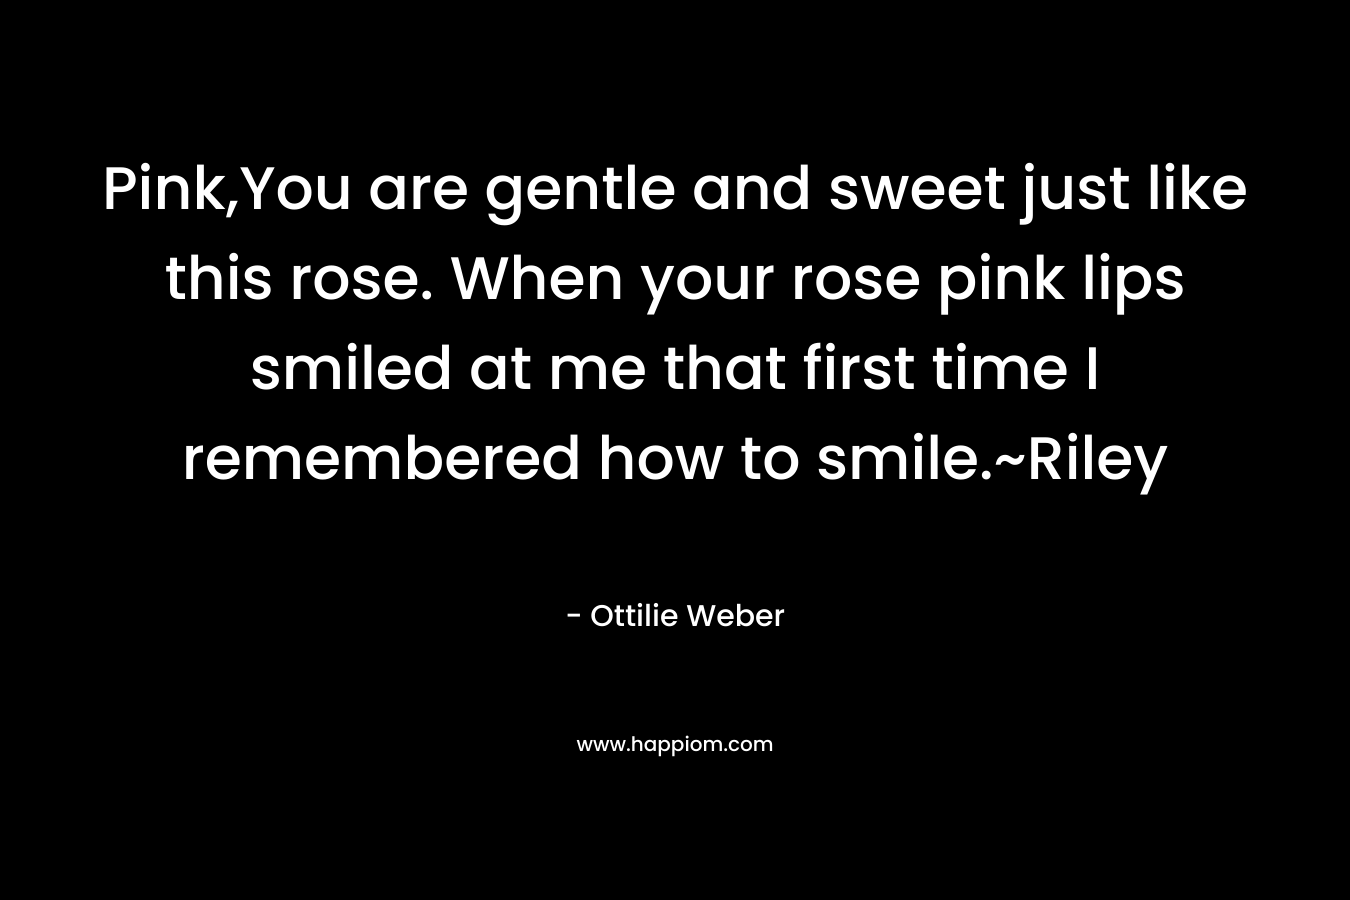 Pink,You are gentle and sweet just like this rose. When your rose pink lips smiled at me that first time I remembered how to smile.~Riley – Ottilie Weber